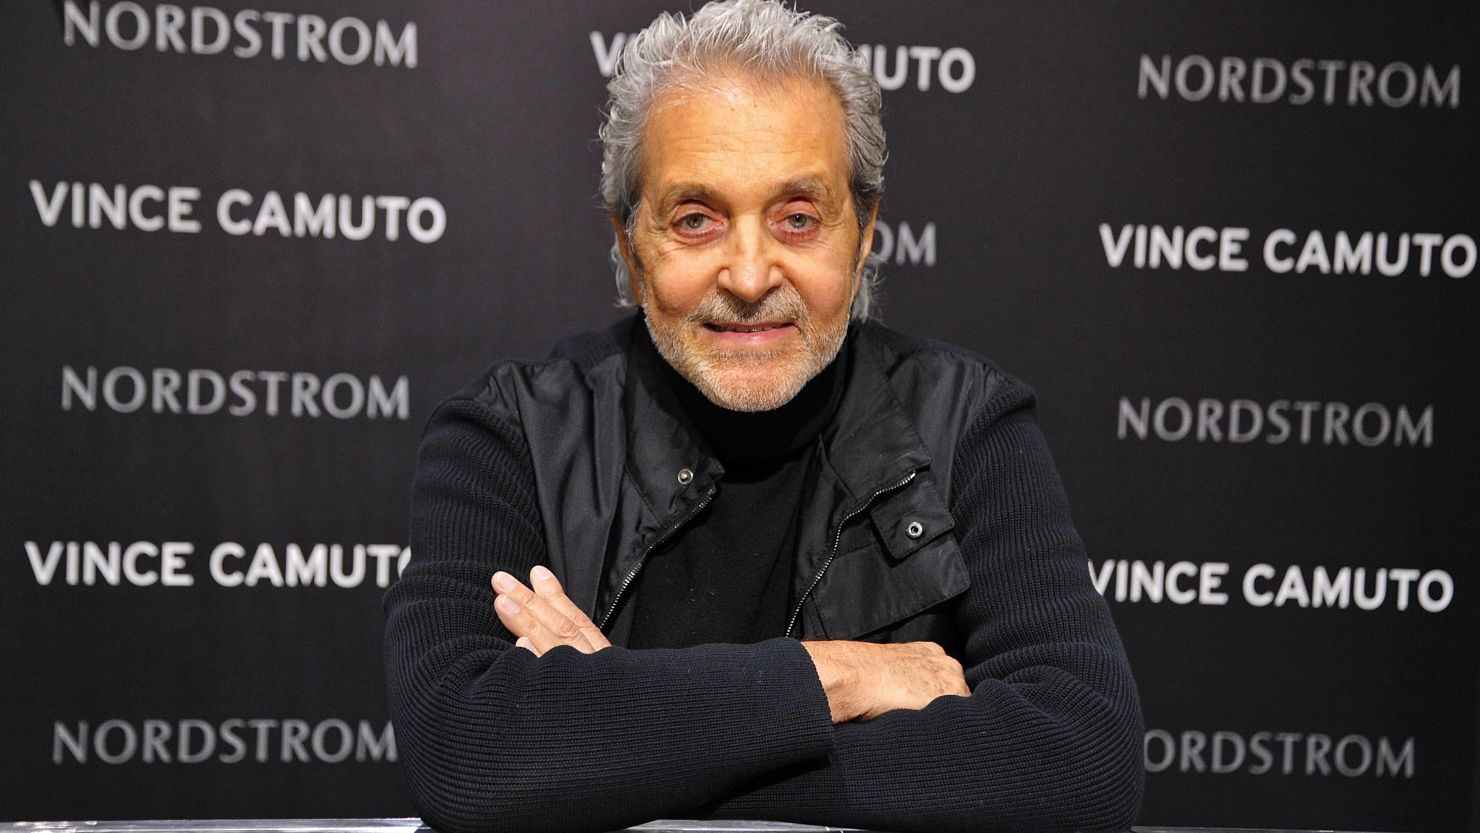 Vince Camuto worked with some of fashion's biggest names, such as Tory Burch and Jessica Simpson.